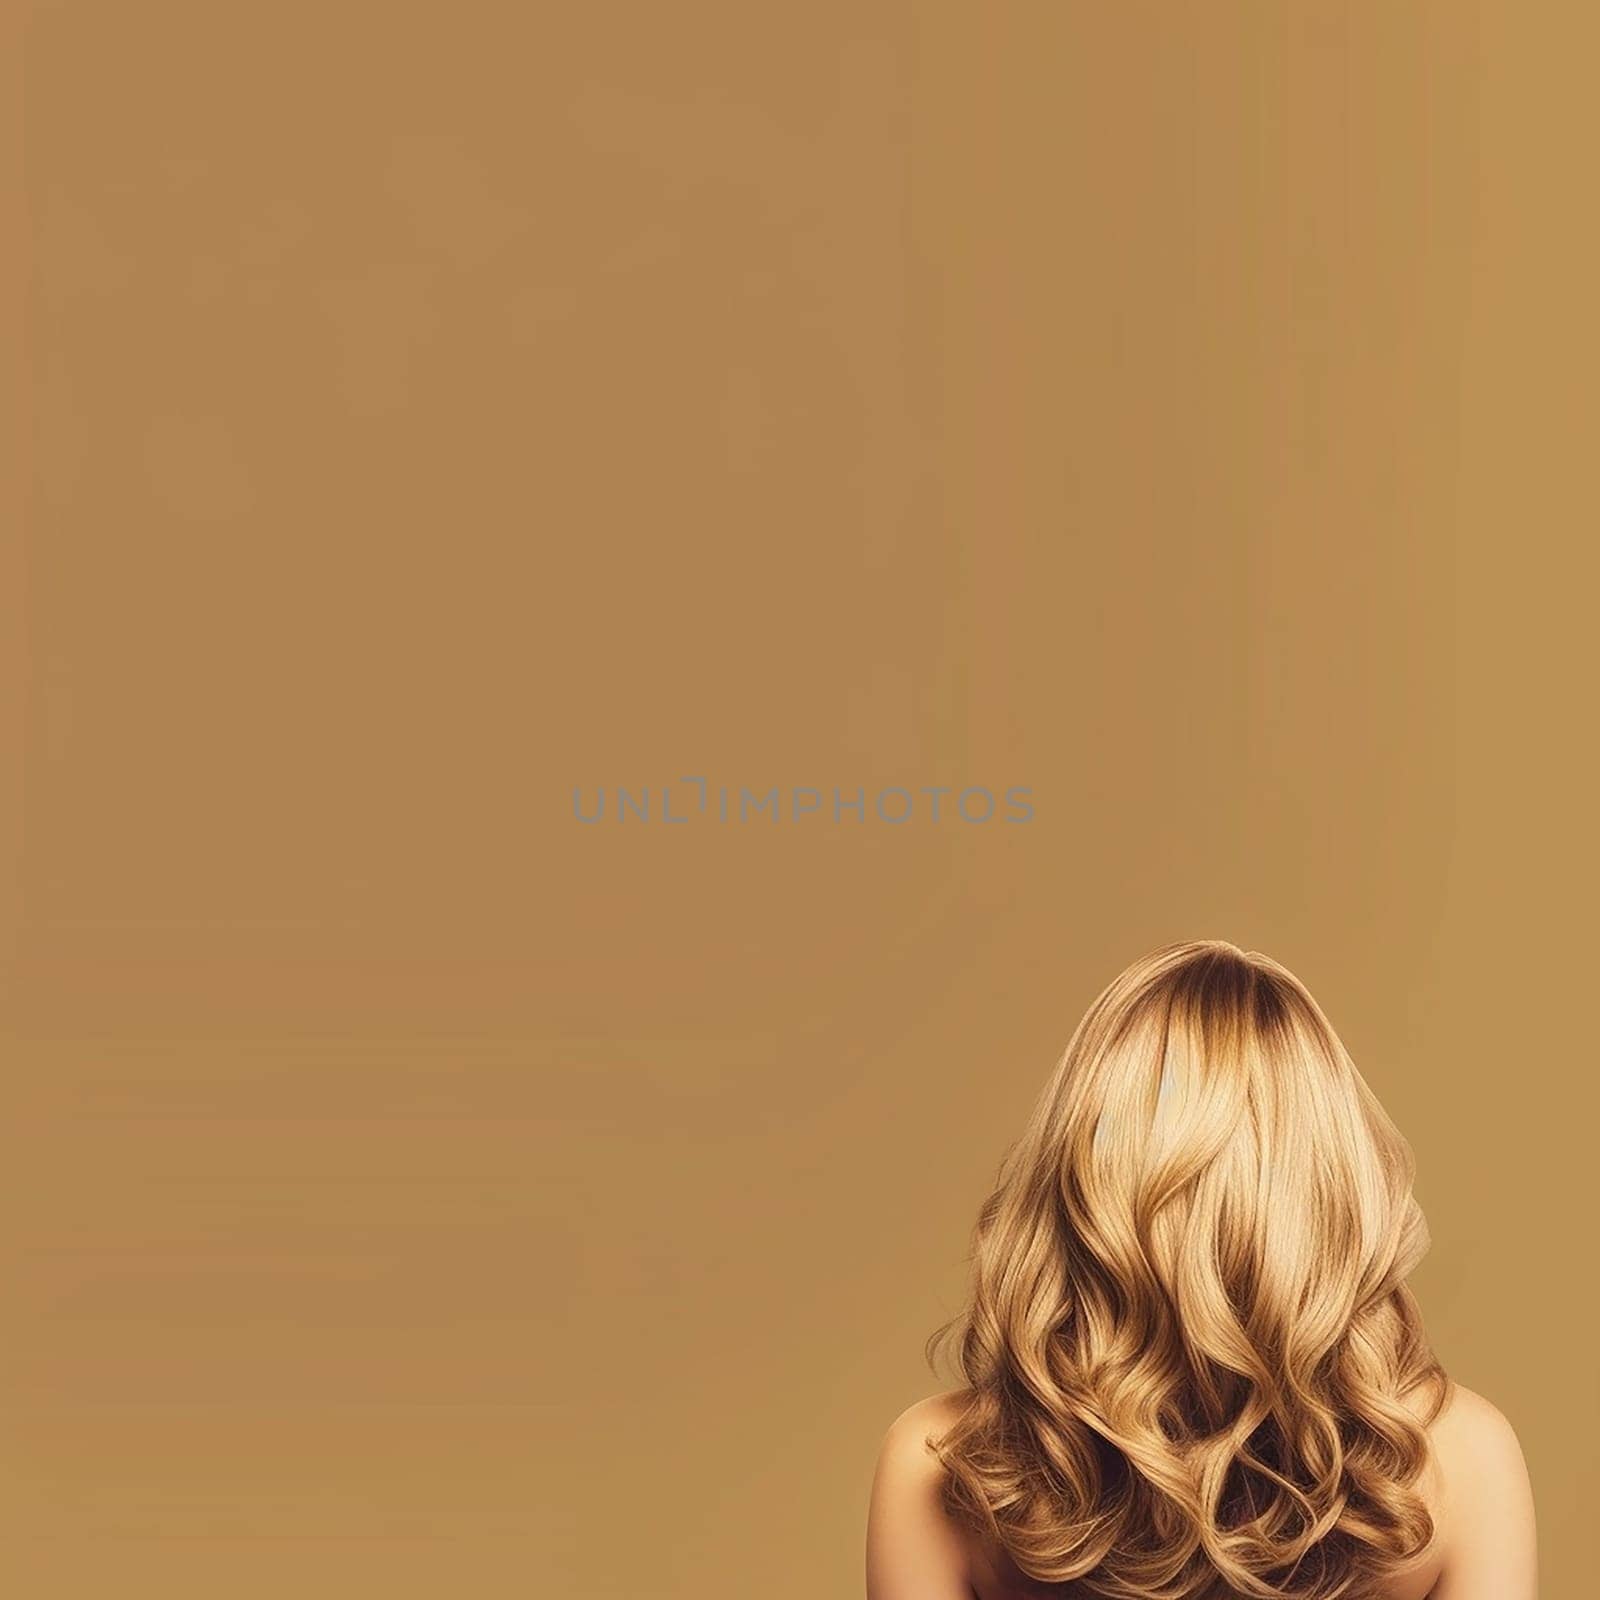 Back view of a person with curly blonde hair against a beige background.